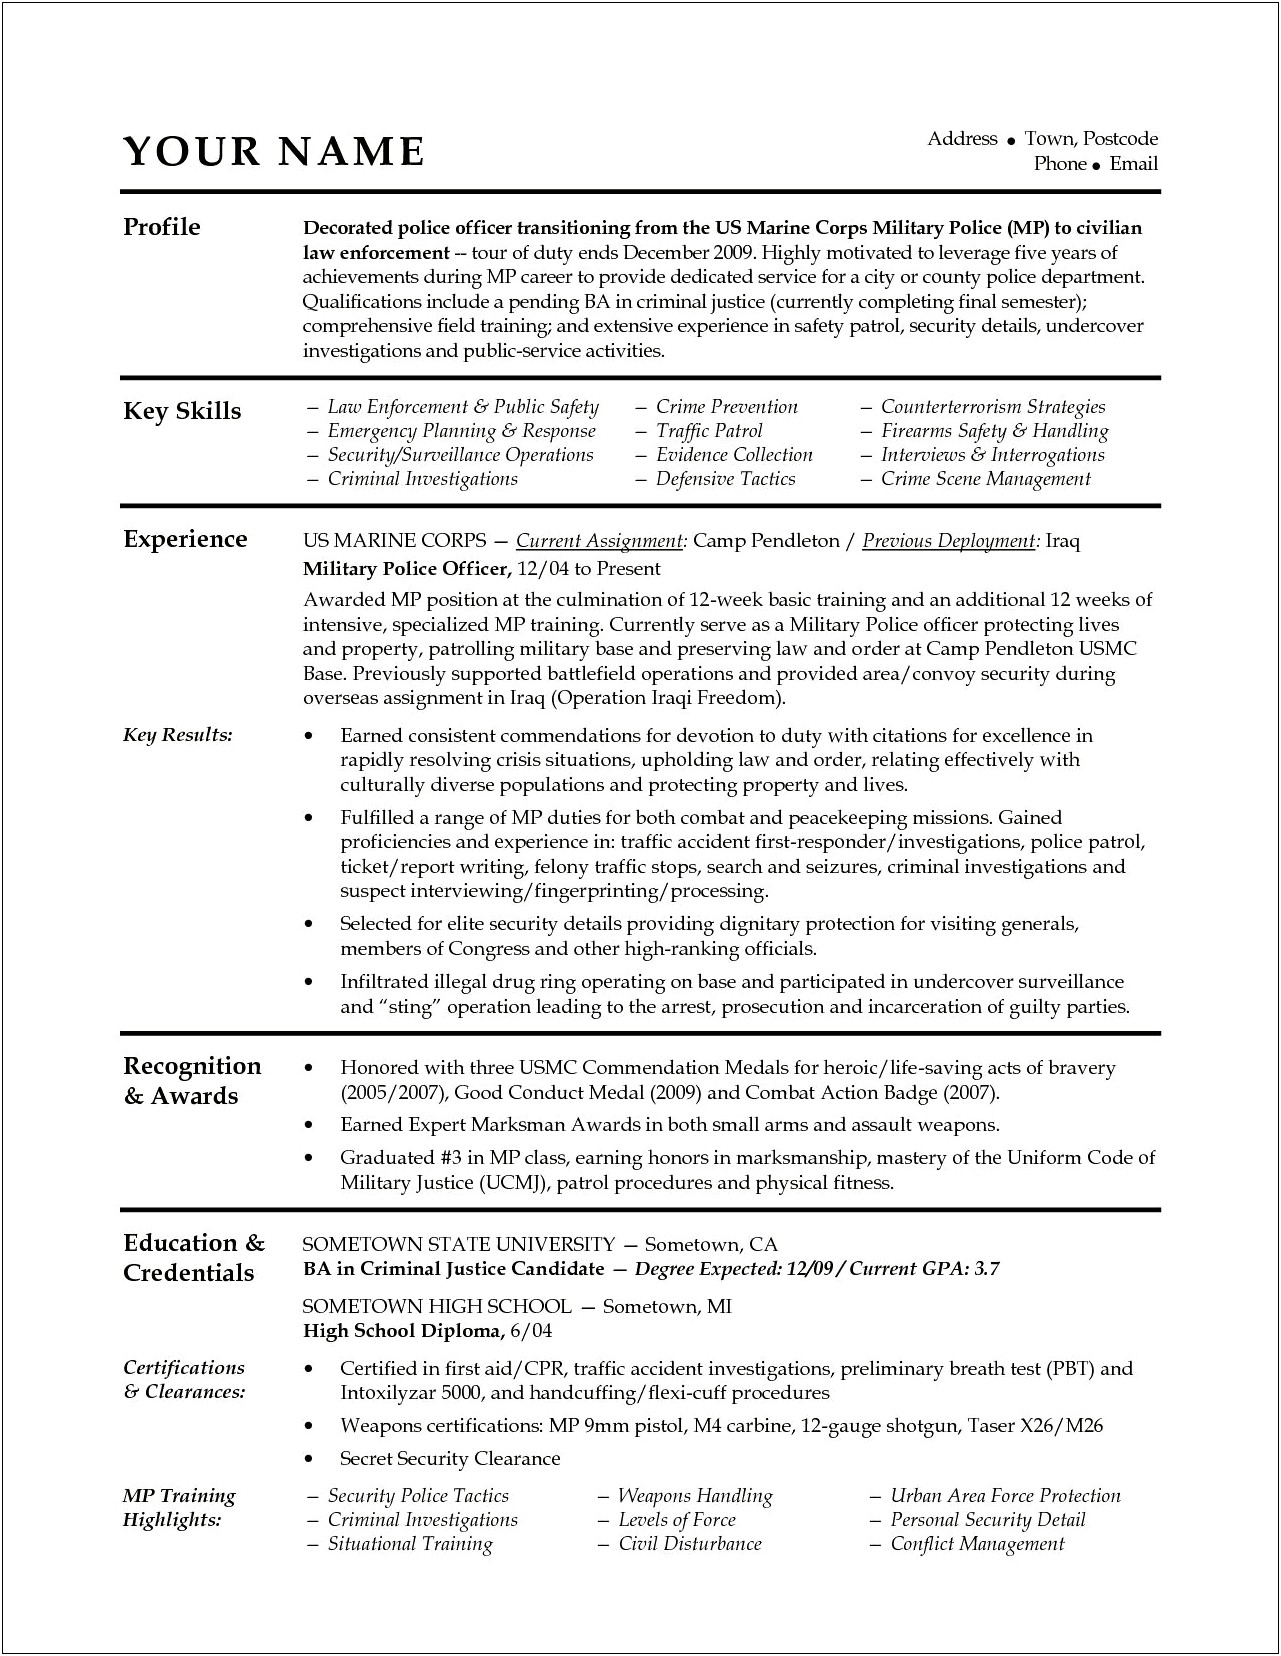 Free Professional Resume Writer For Military